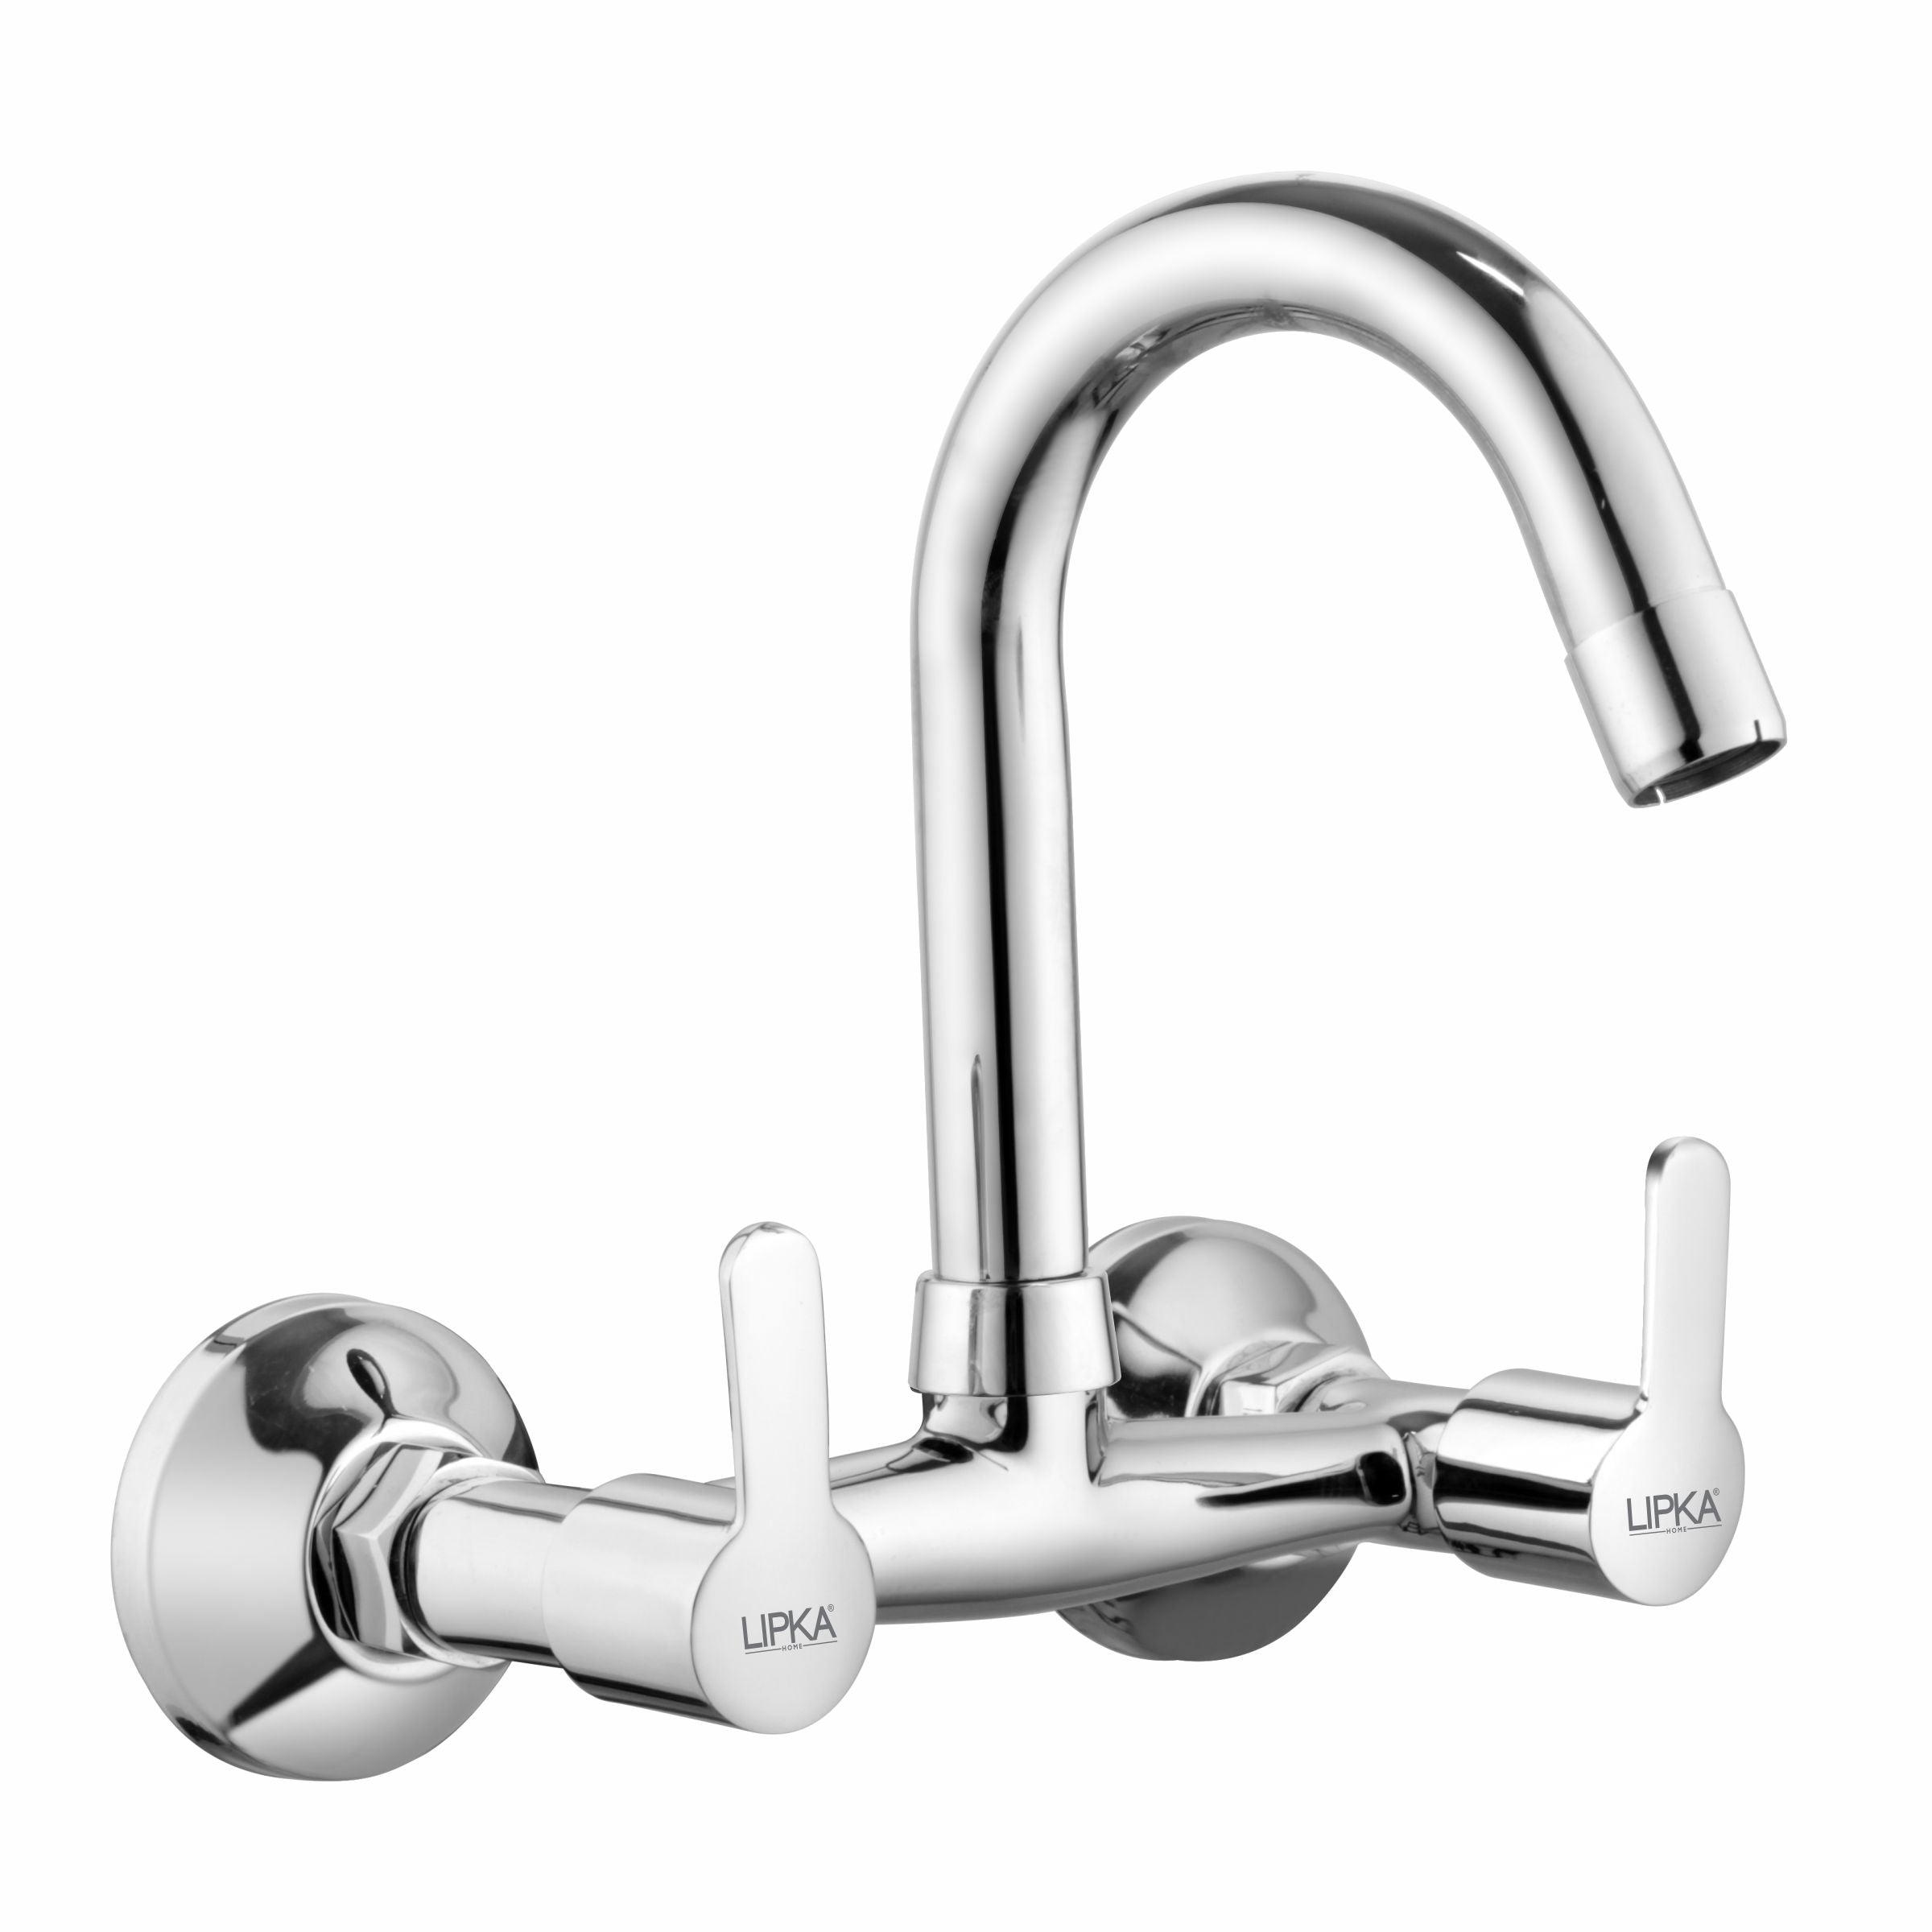 Frenk Sink Mixer Brass Faucet with Round Swivel Spout (12 Inches)